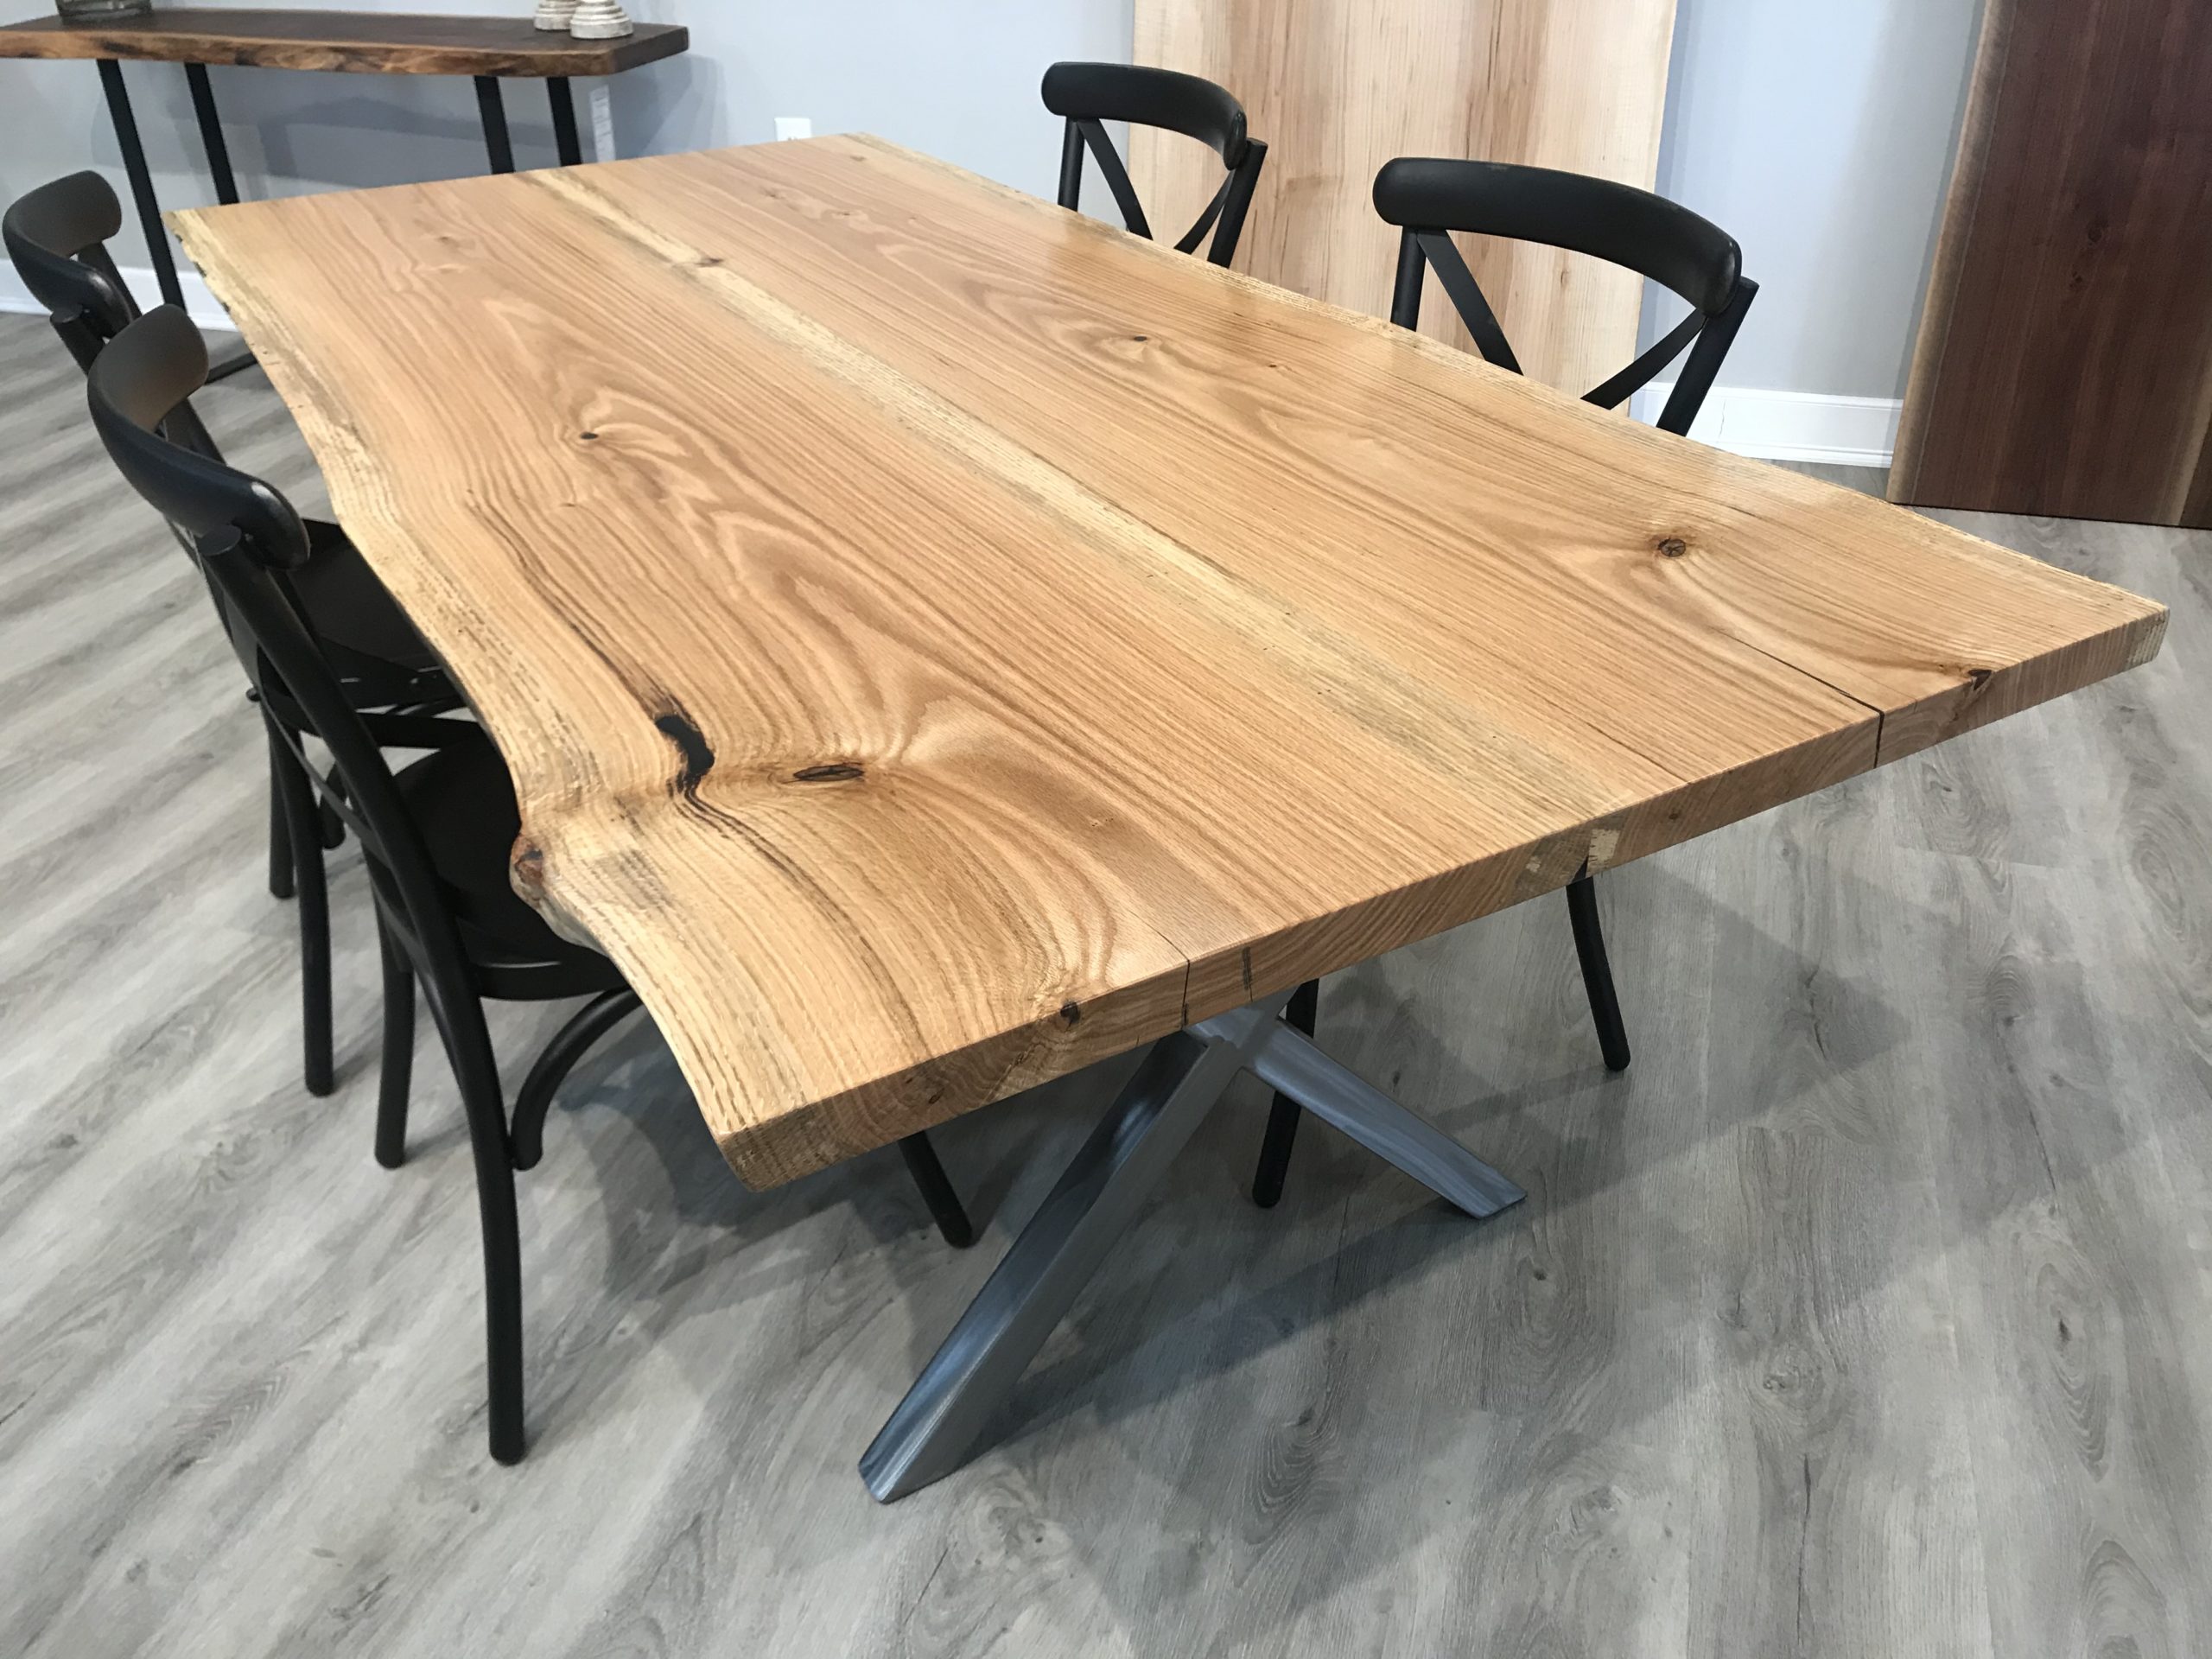 Oak Dining Room Table And Chairs In Durban